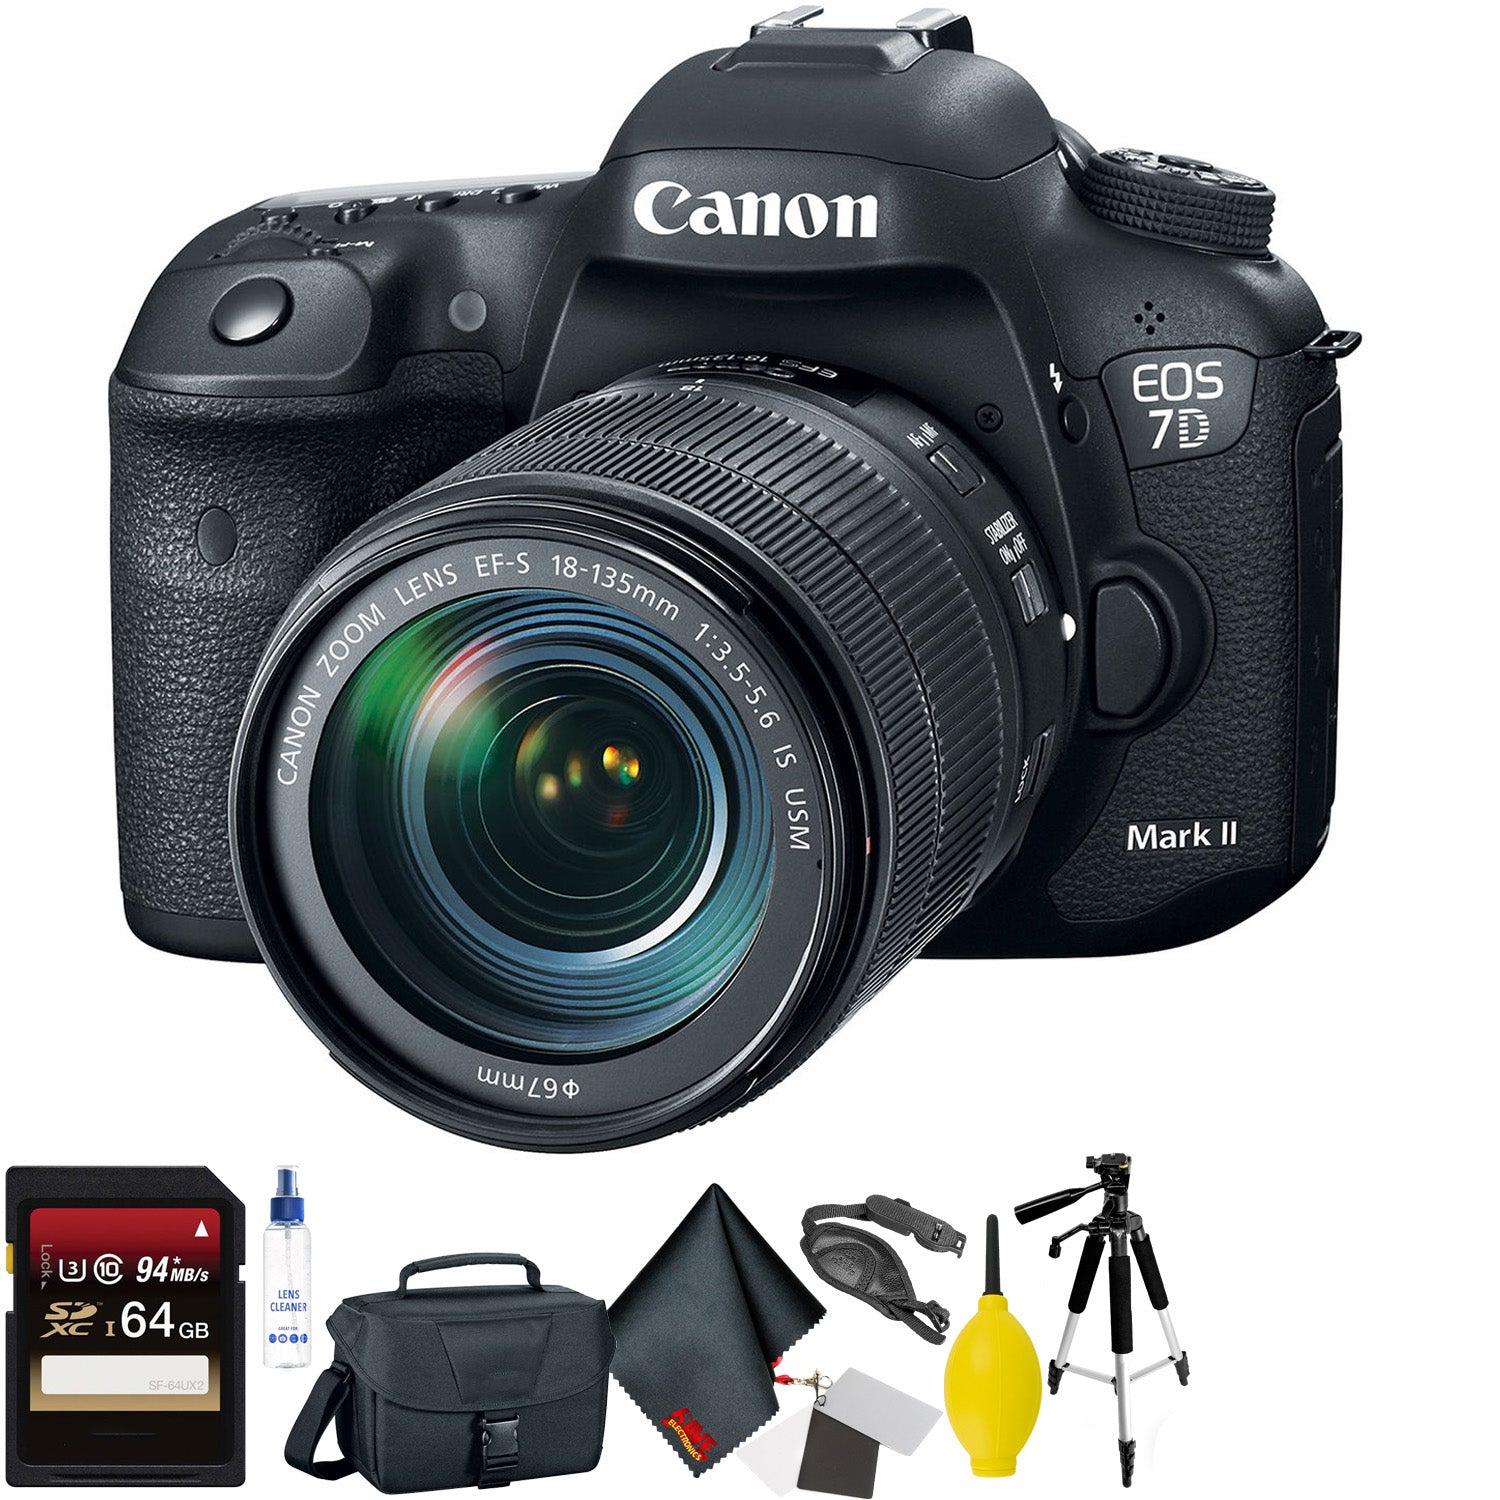 Canon EOS 7D Mark II DSLR Camera with 18-135mm f/3.5-5.6 is USM Lens & W-E1 Wi-Fi Adapter + 64GB Memory Card + Mega Acce